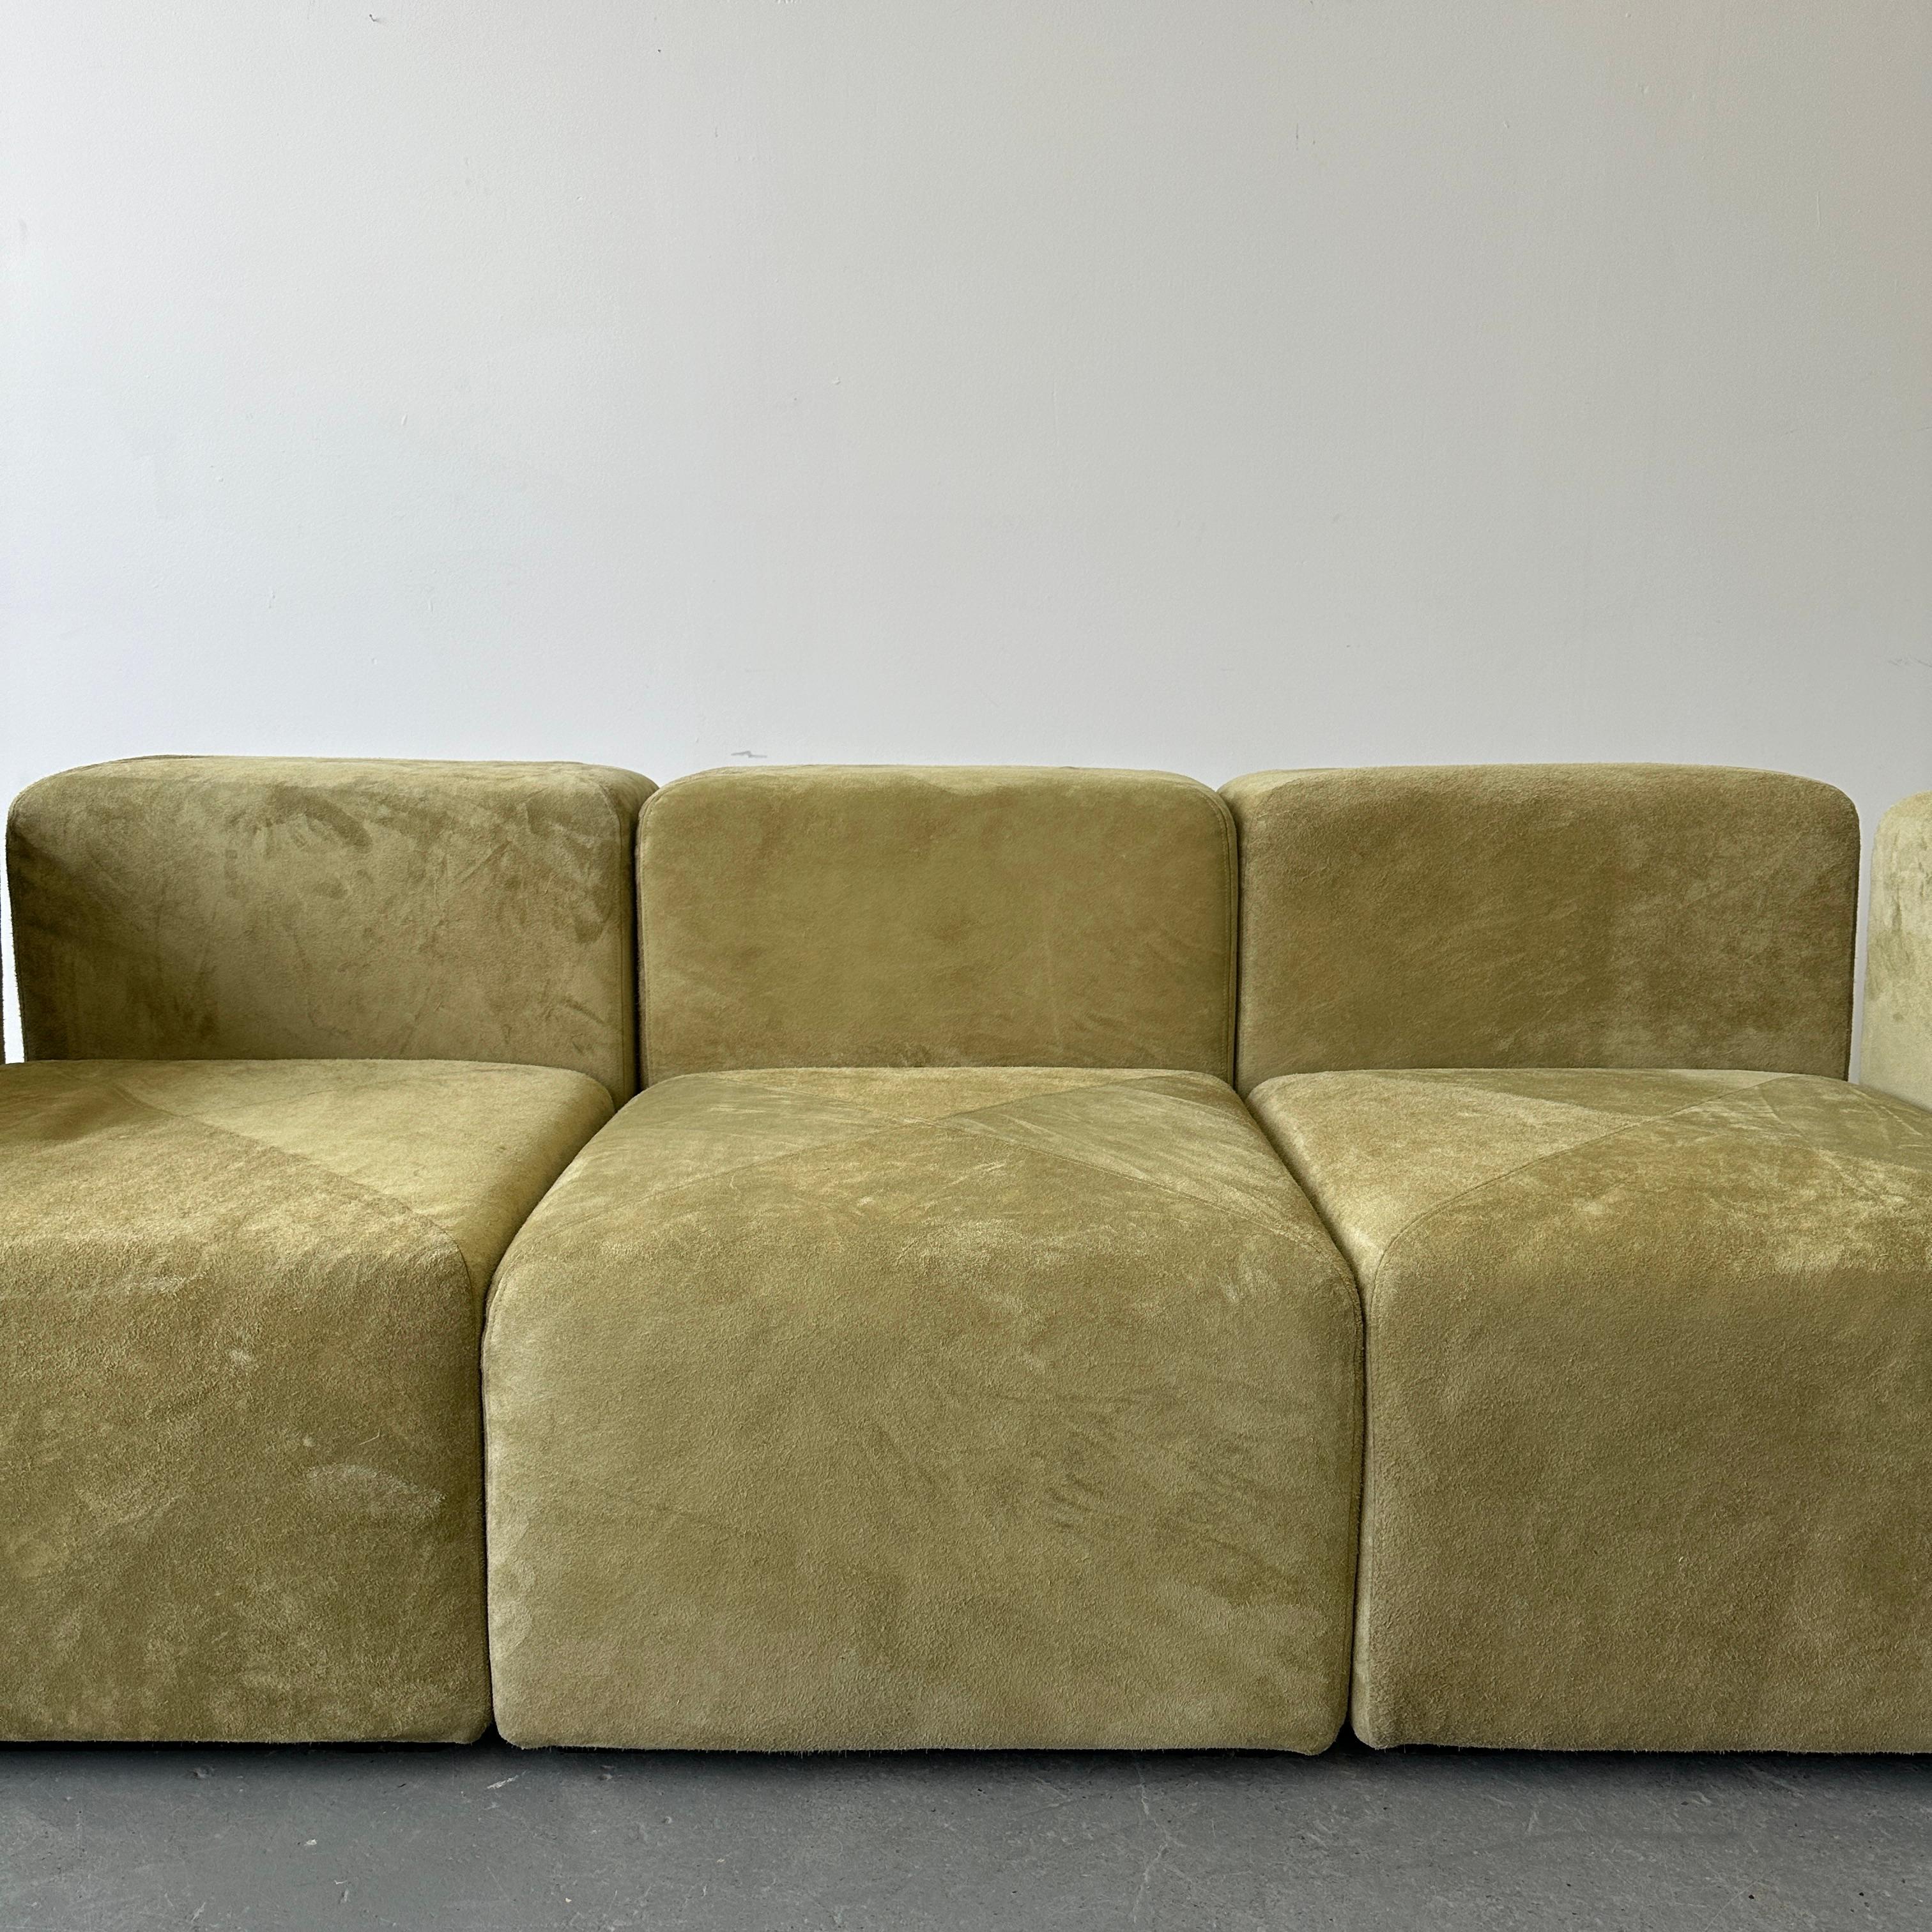 Sistema 61 Sofa by Giancarlo Piretti in Holly Hunt Suede In Good Condition For Sale In Chicago, IL